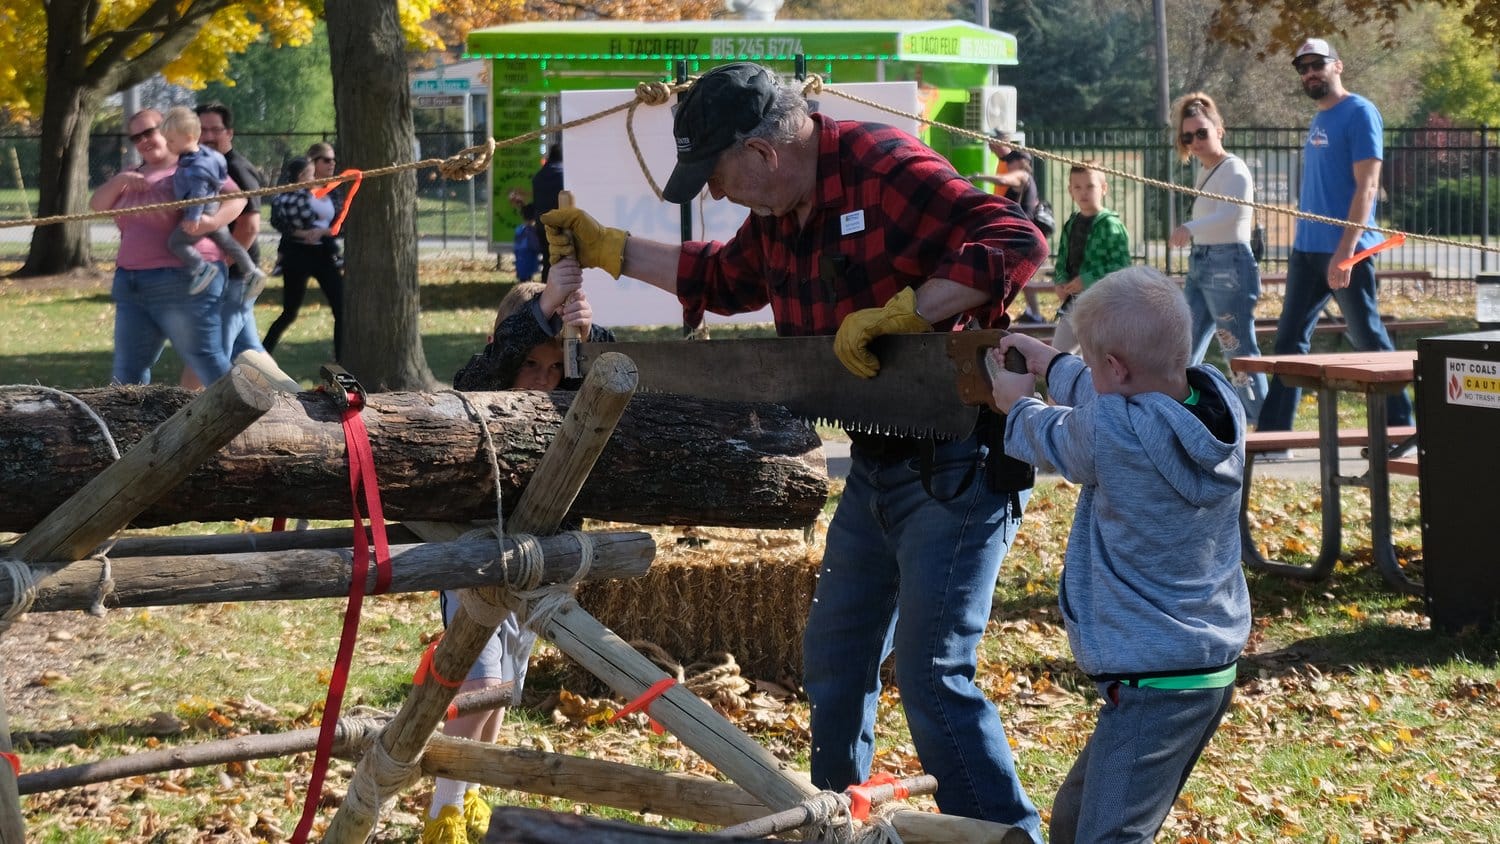 Two boys getting helped with a double buck saw.